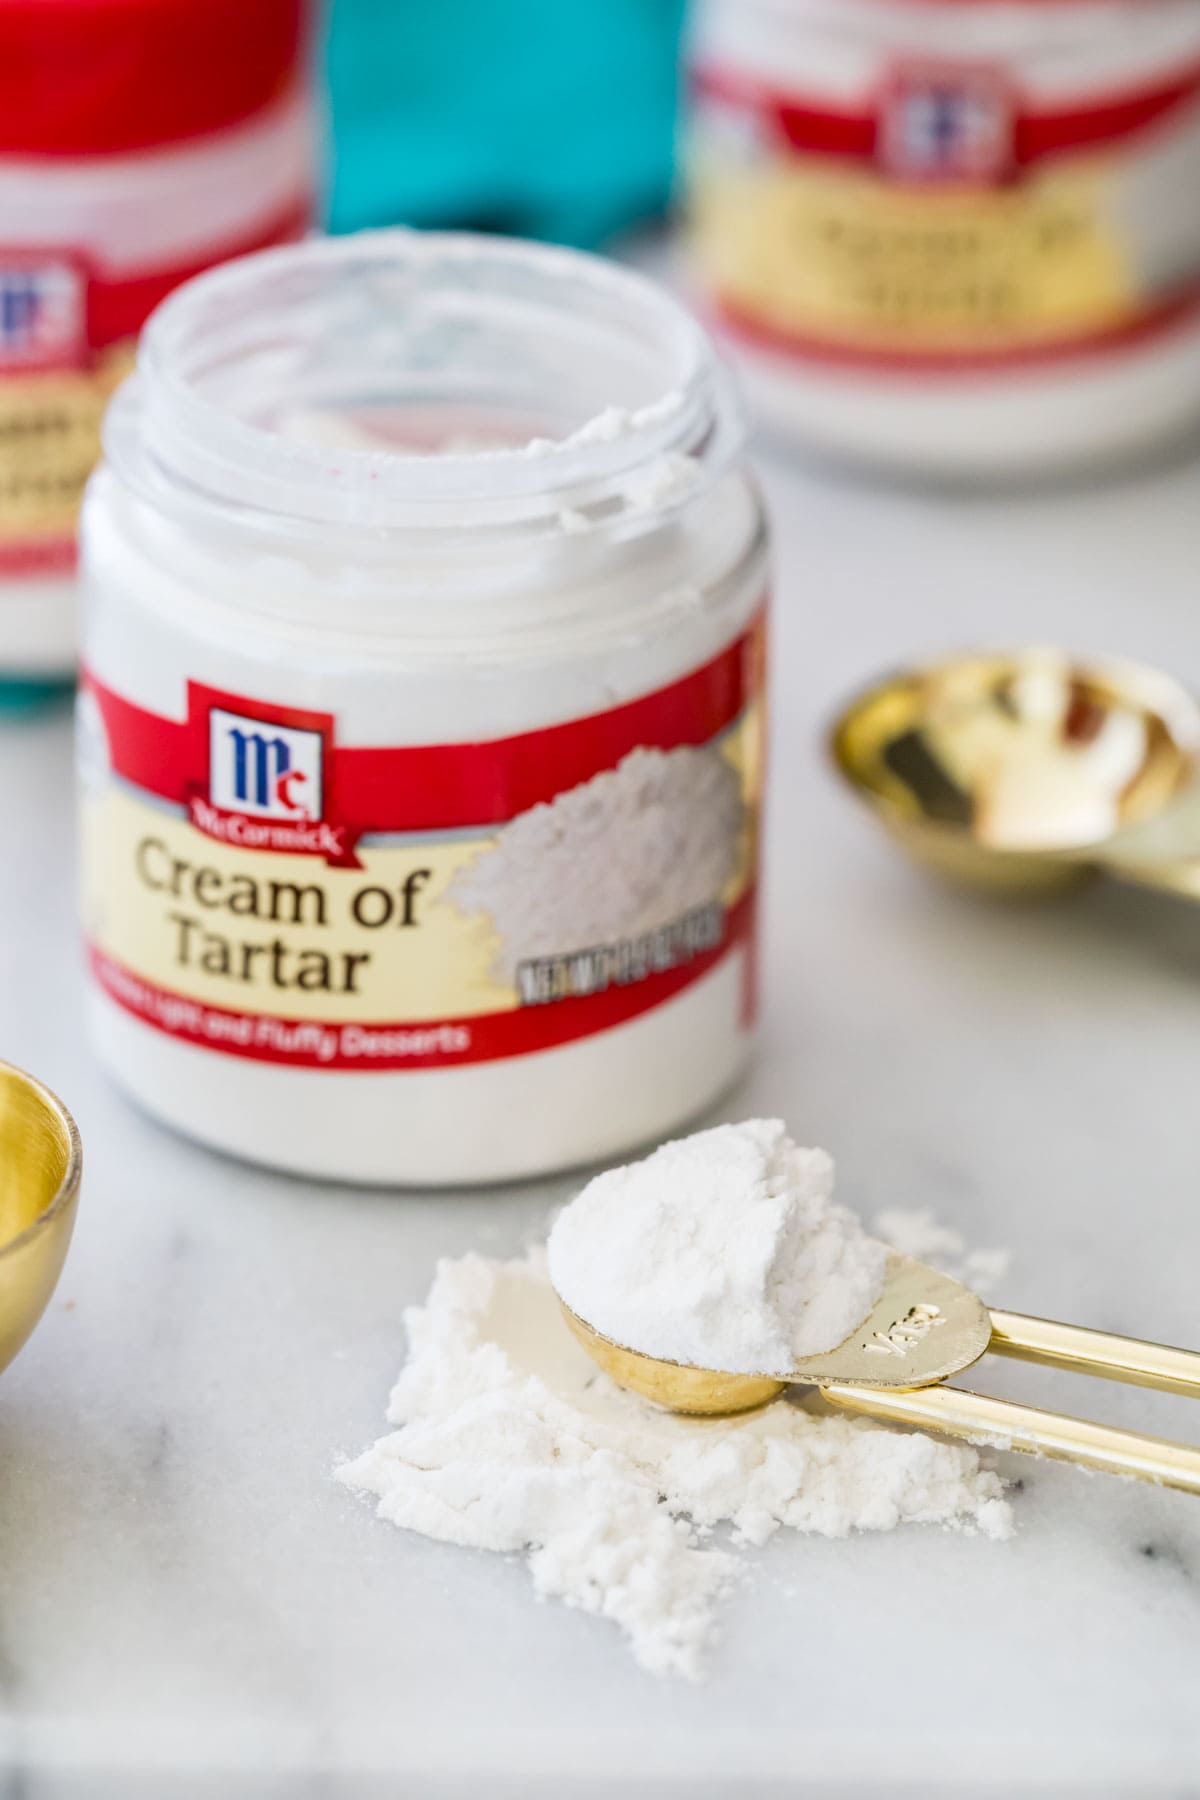 Small open jar of cream of tartar with a gold measuring spoon of cream of tartar beside it.